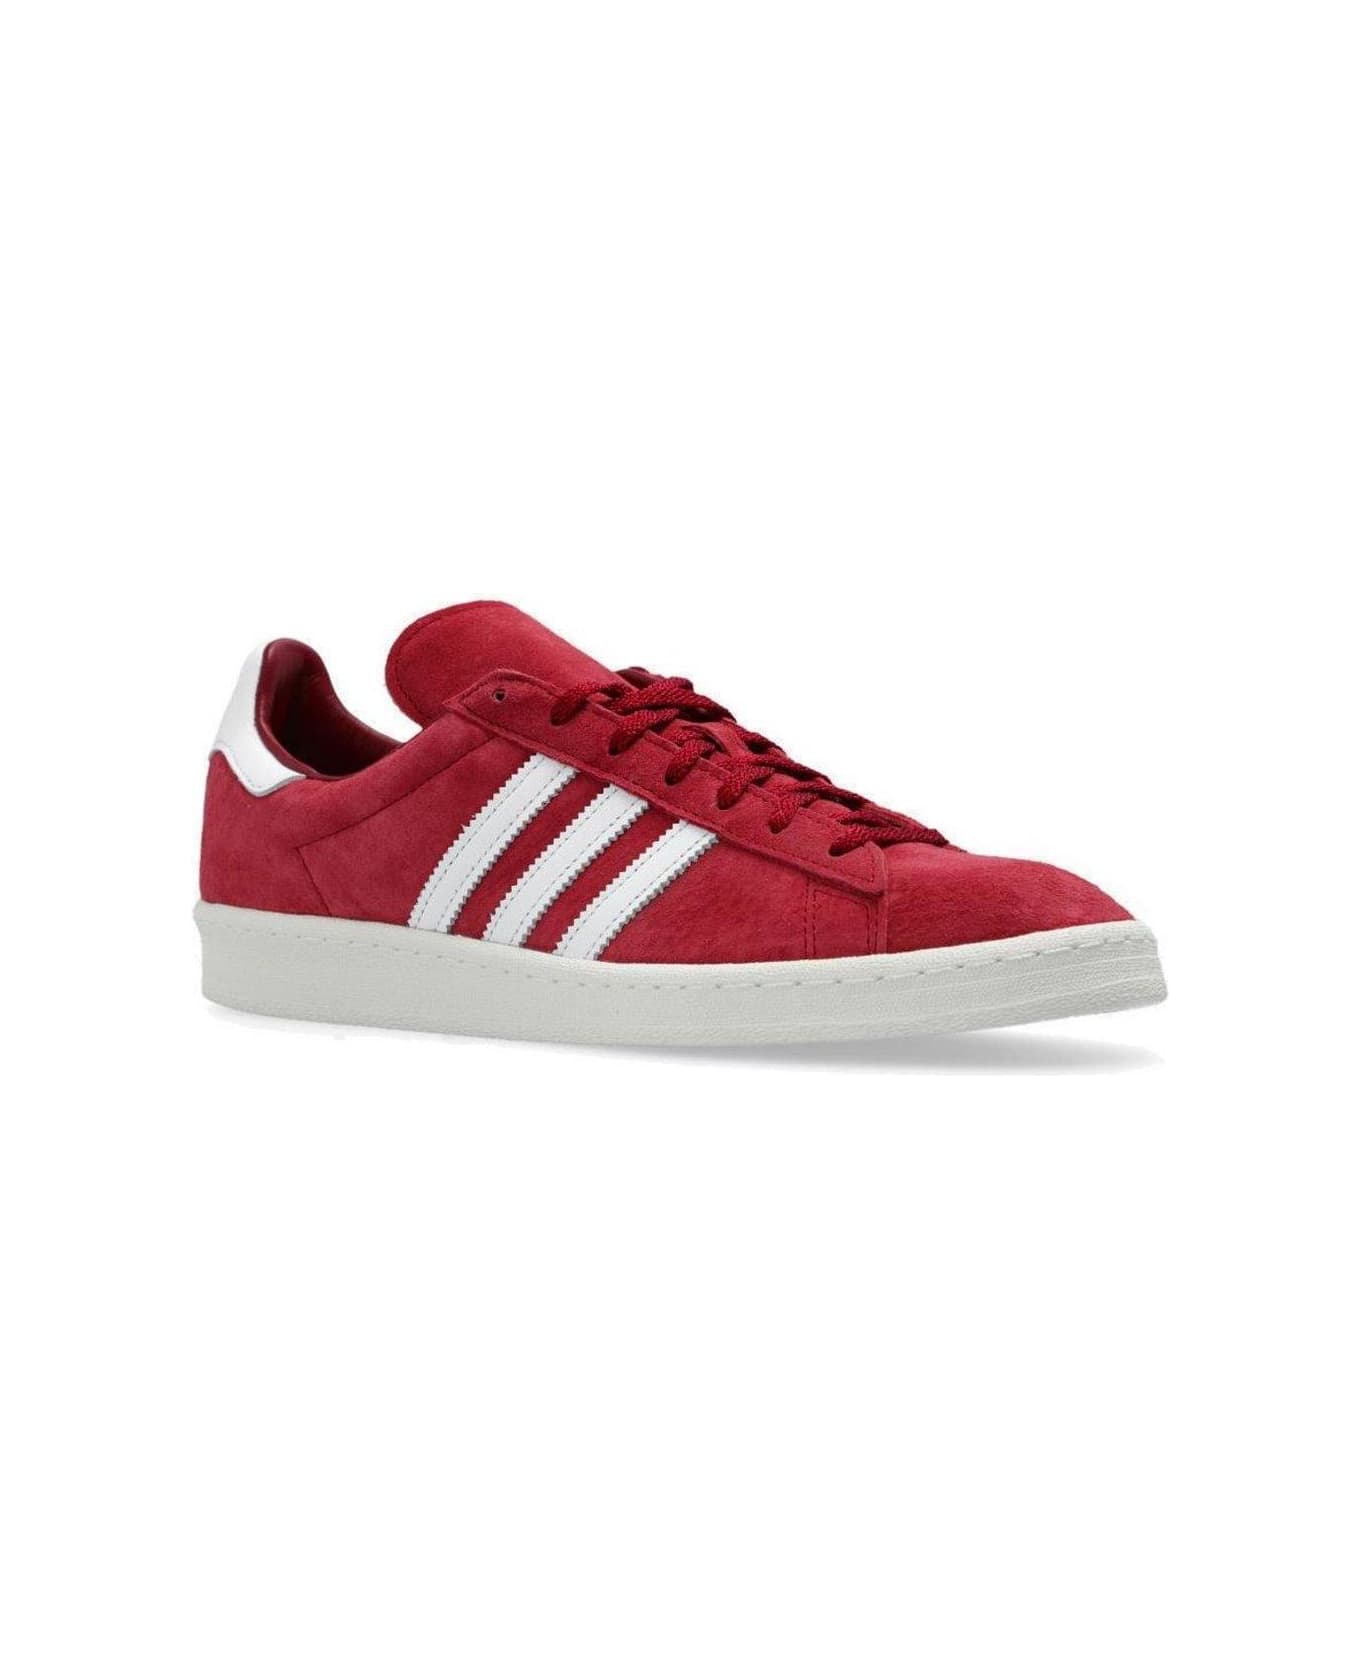 Adidas Campus 80s Lace-up Sneakers - BORDEAUX スニーカー